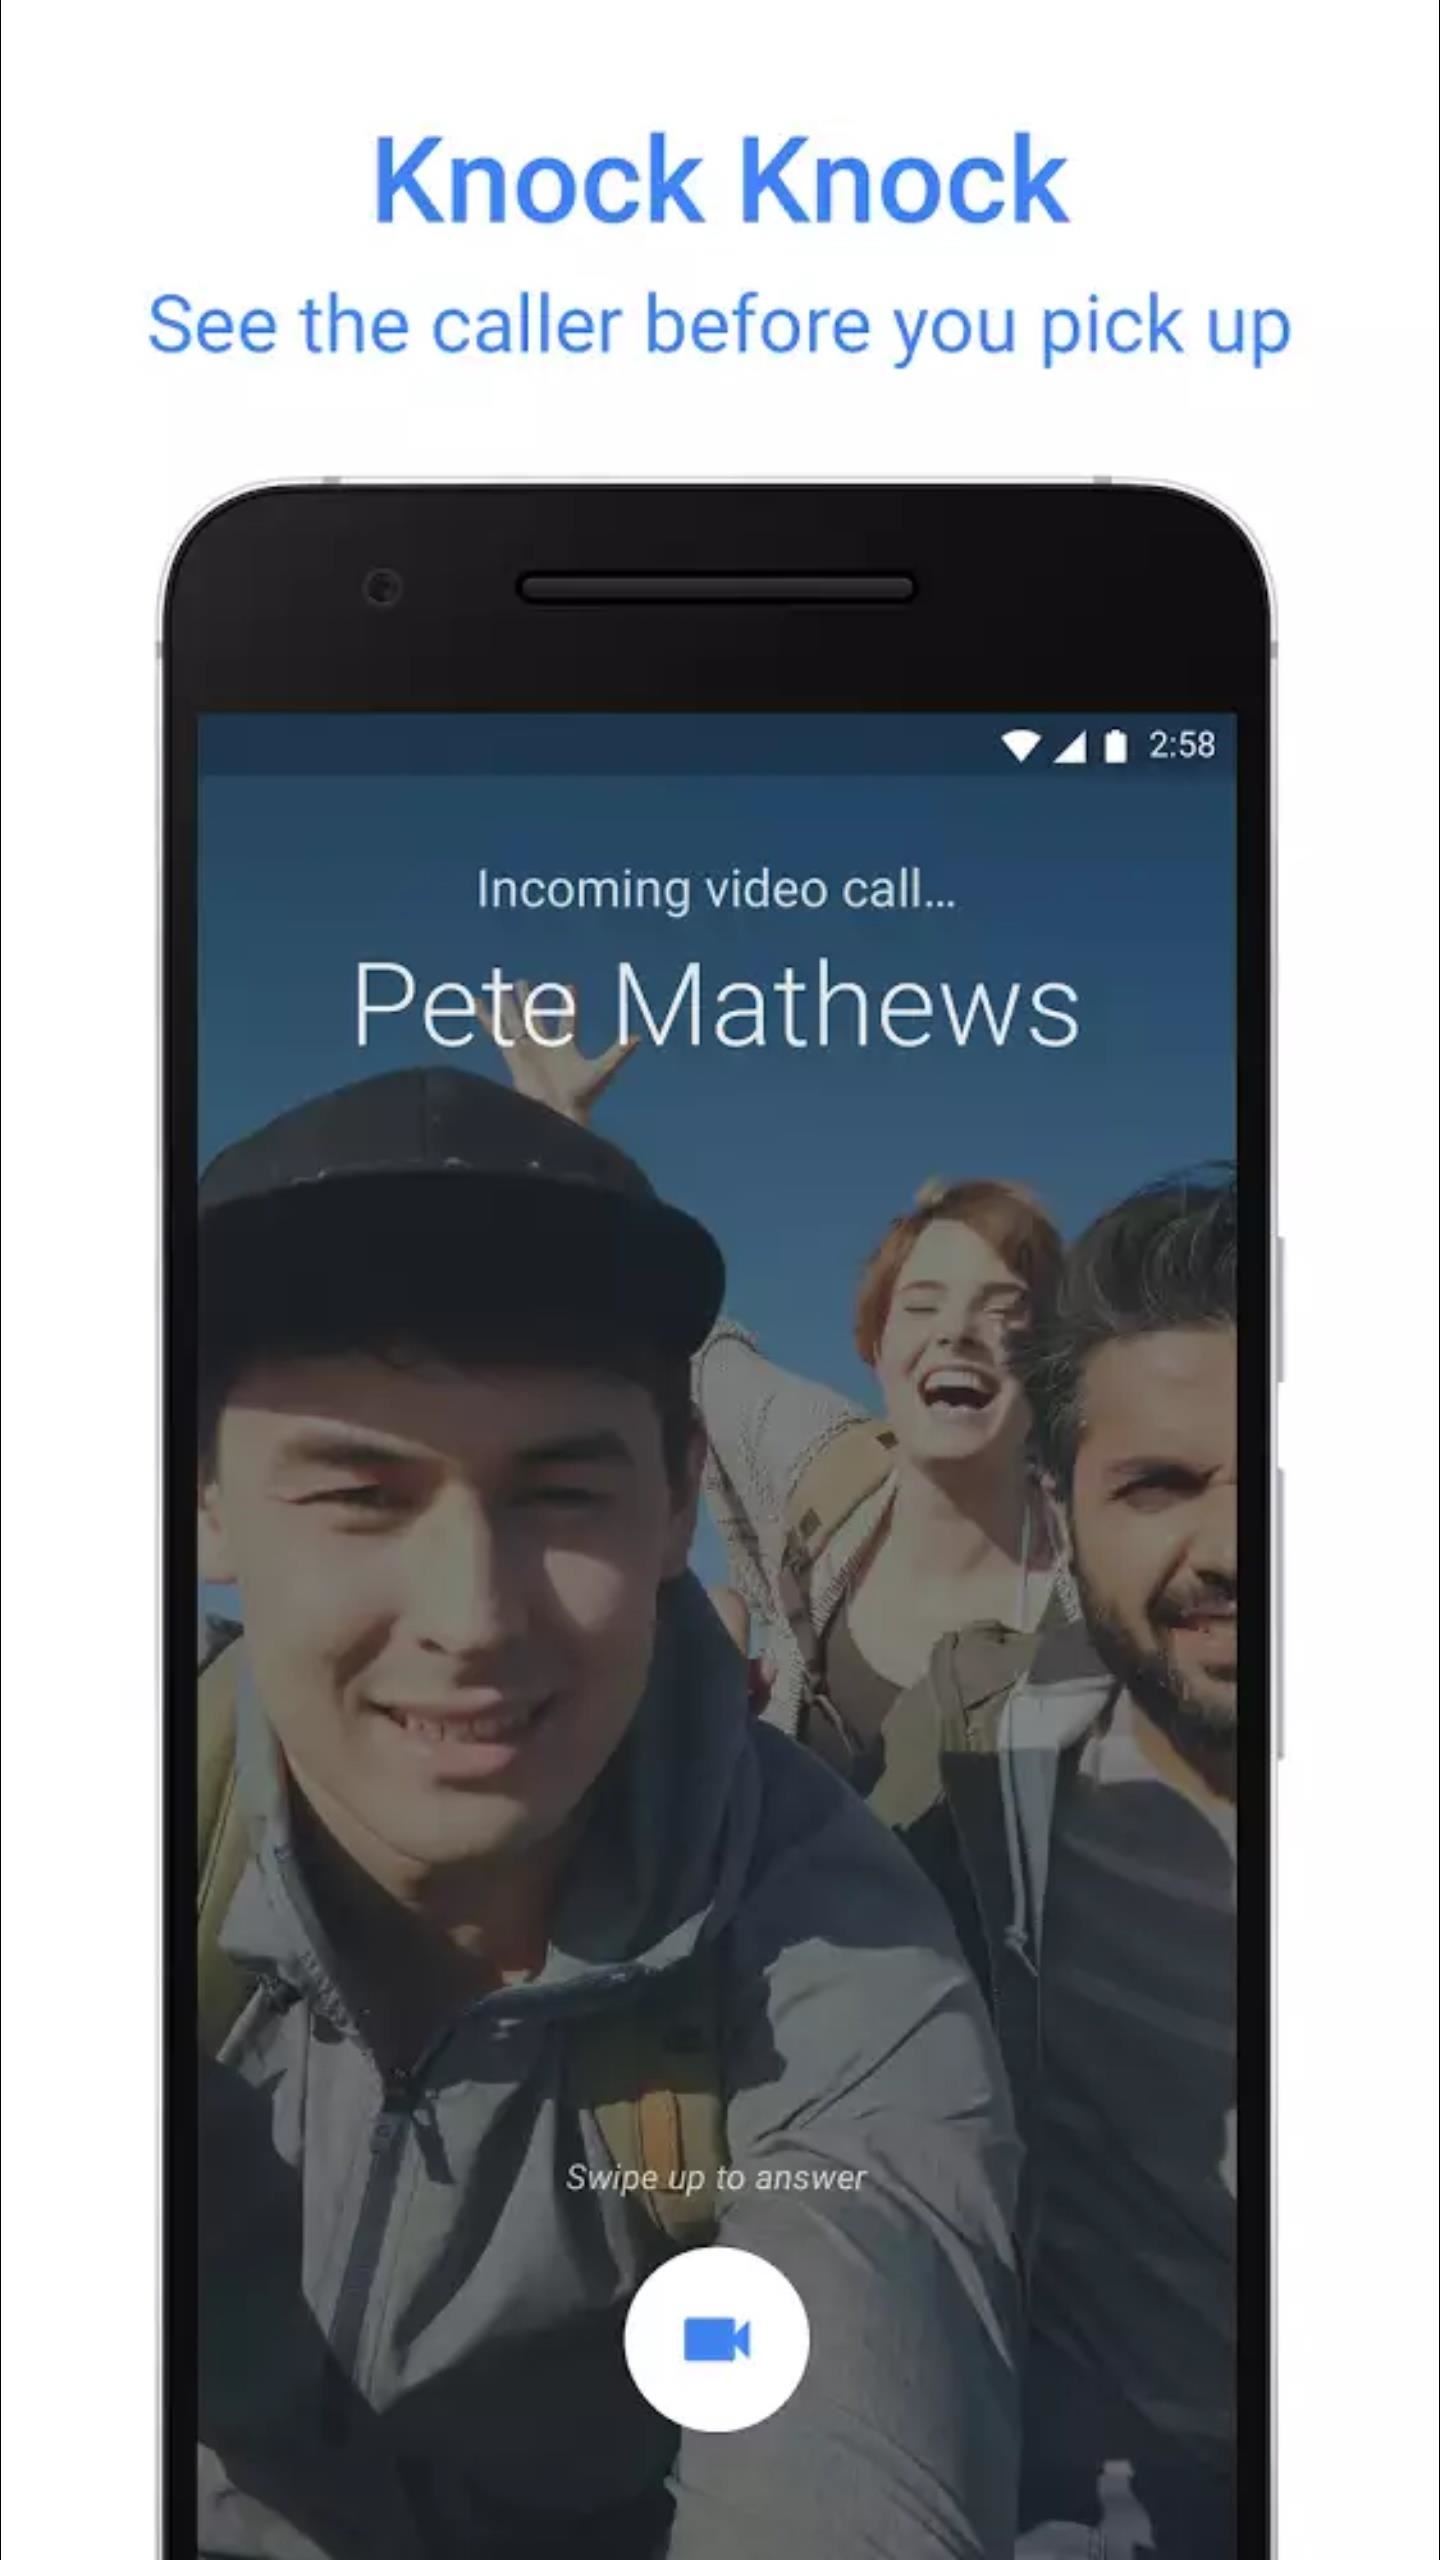 Google Finally Launches Duo—Here's Why You Should Give the New Video Chat App a Try